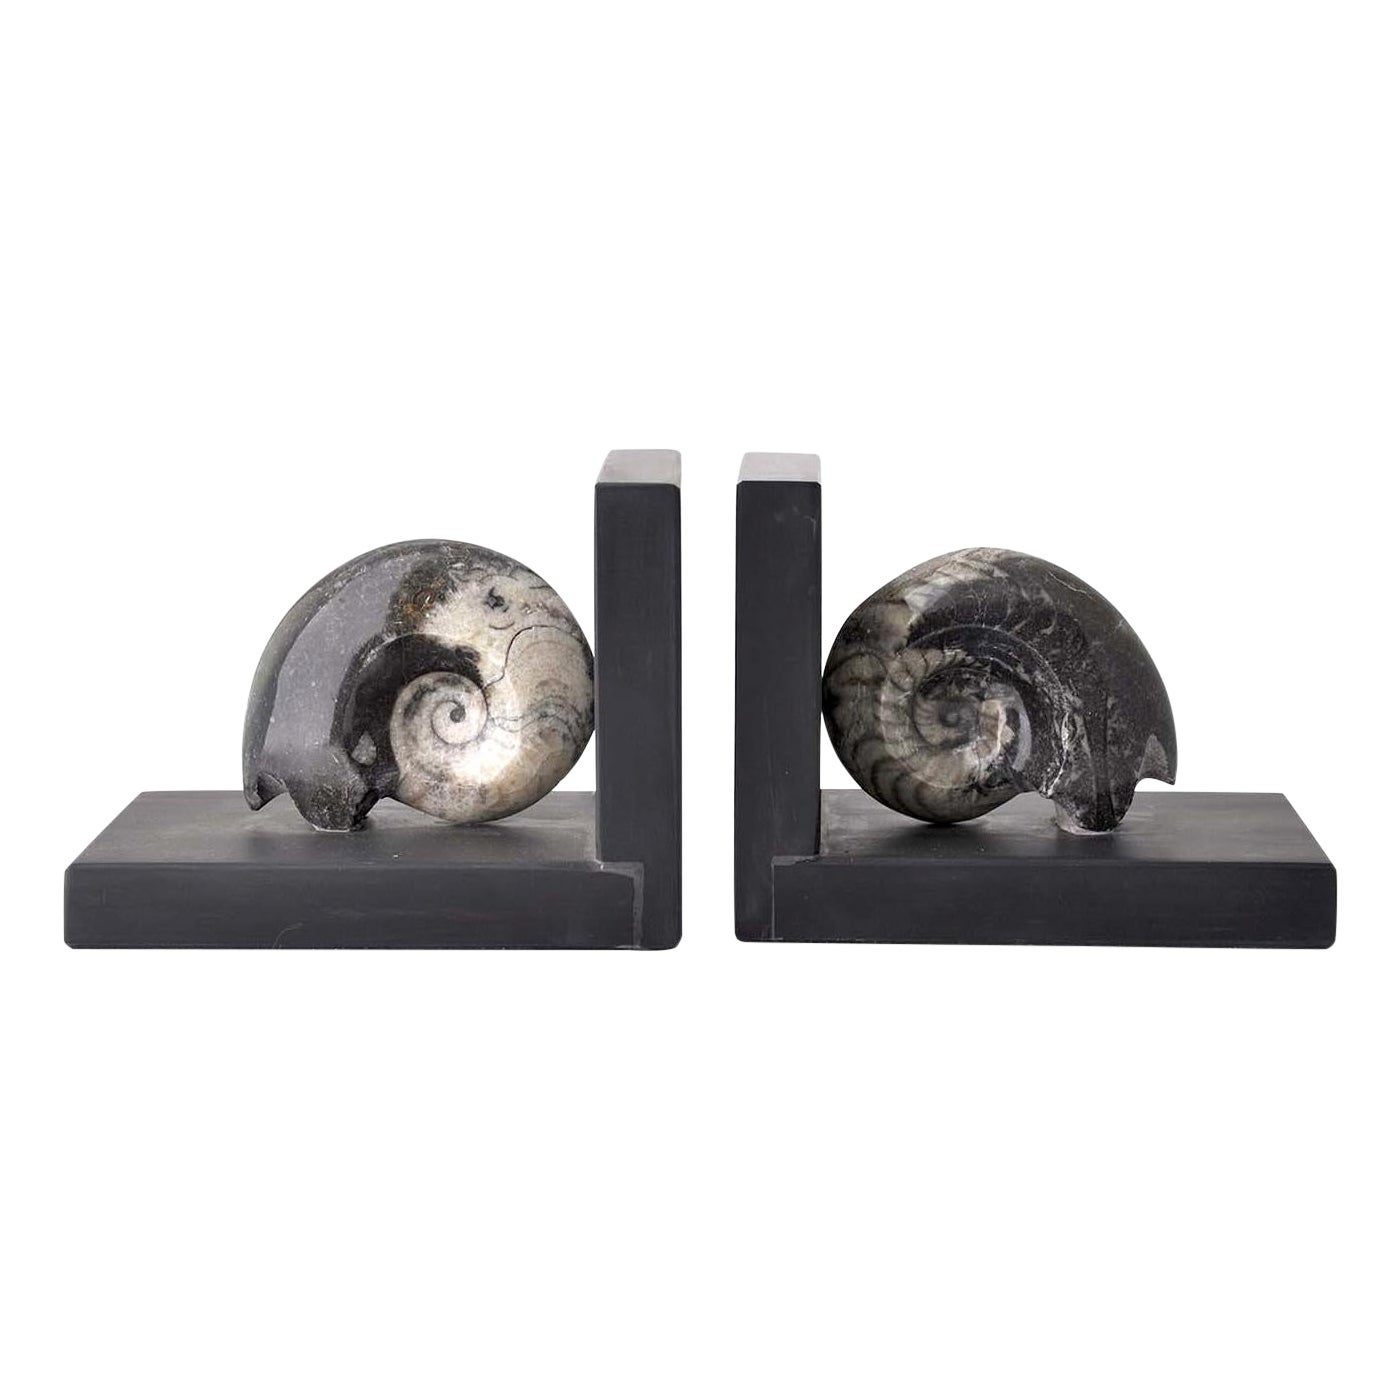 Fossiline Set of Black Bookends by Nino Basso